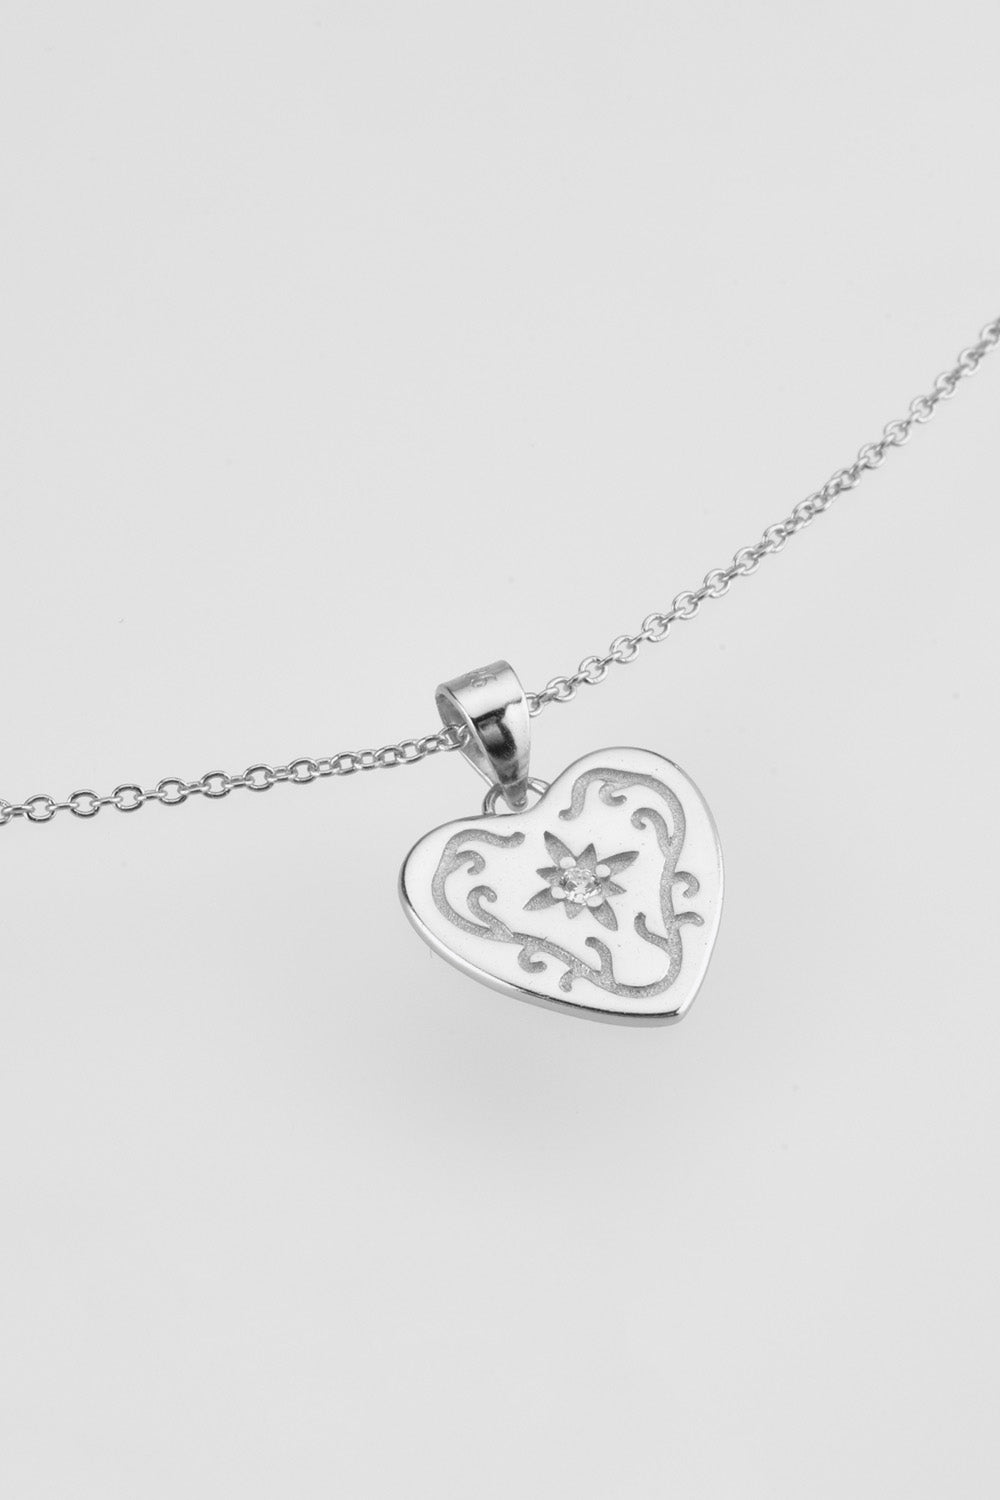 Heart Pendant 925 Sterling Silver Necklace - Necklaces - FITGGINS